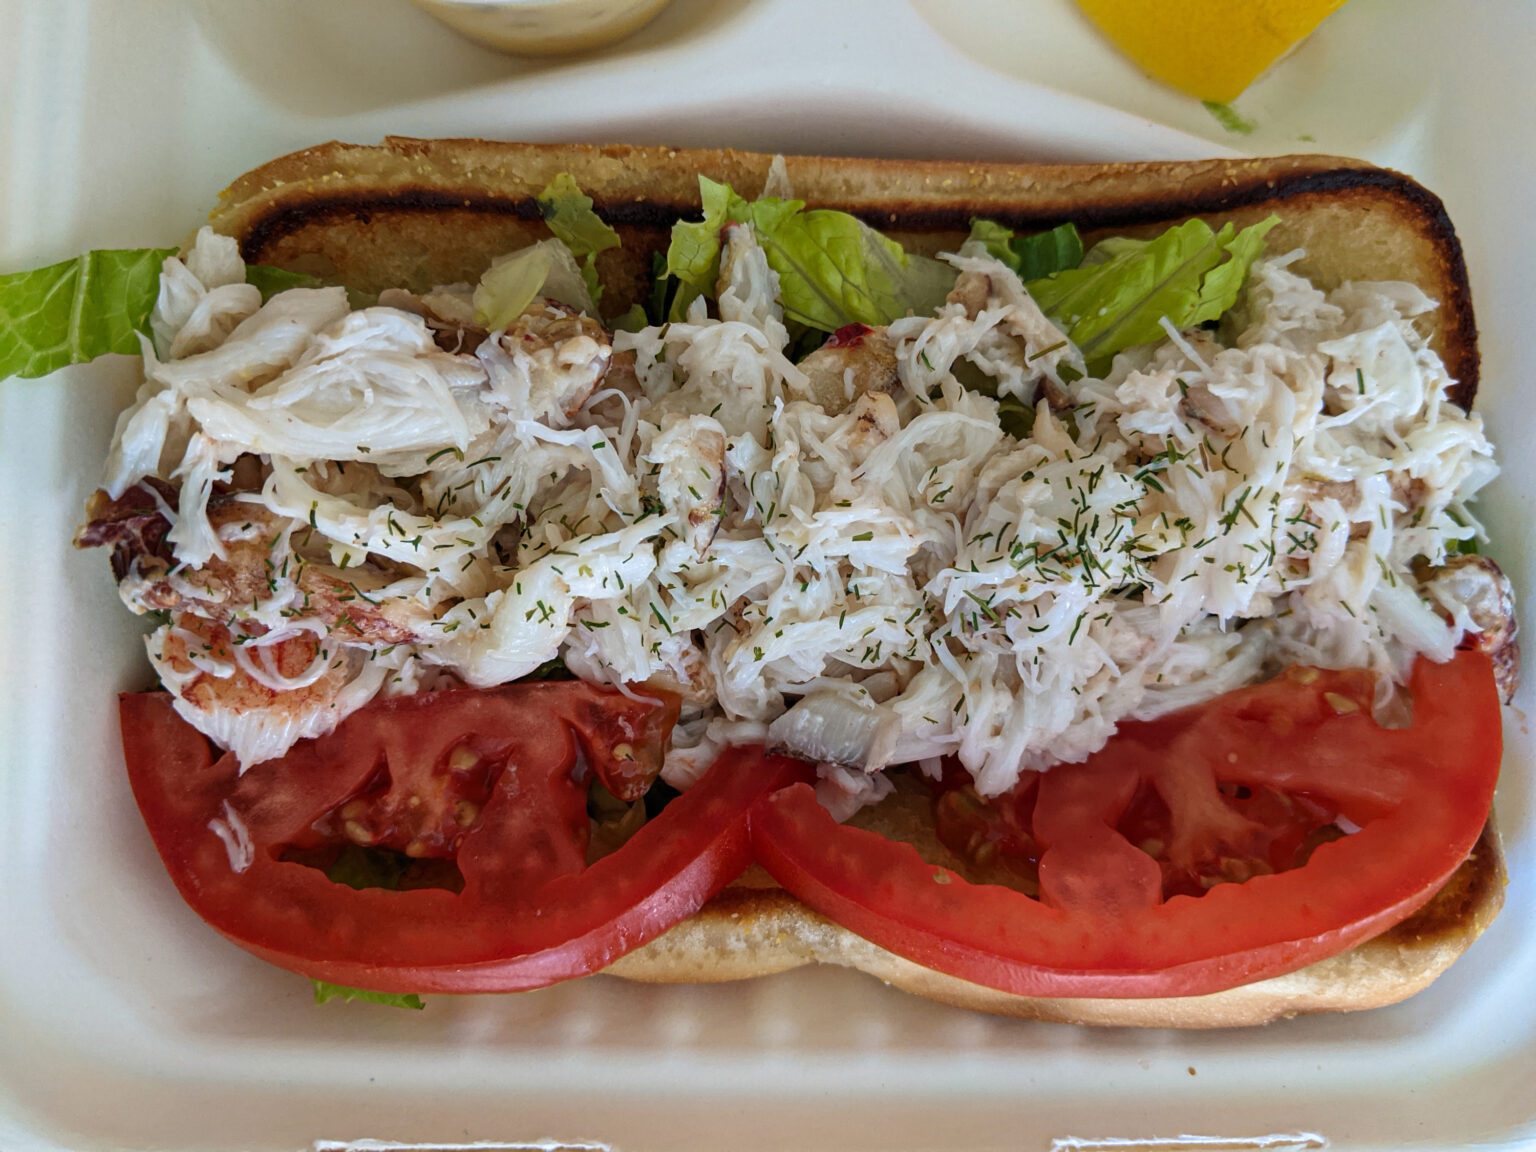 Skagit’s Own Fish Market on Highway 20 serves an amazing crab sandwich. In the sad event that crab is out of season